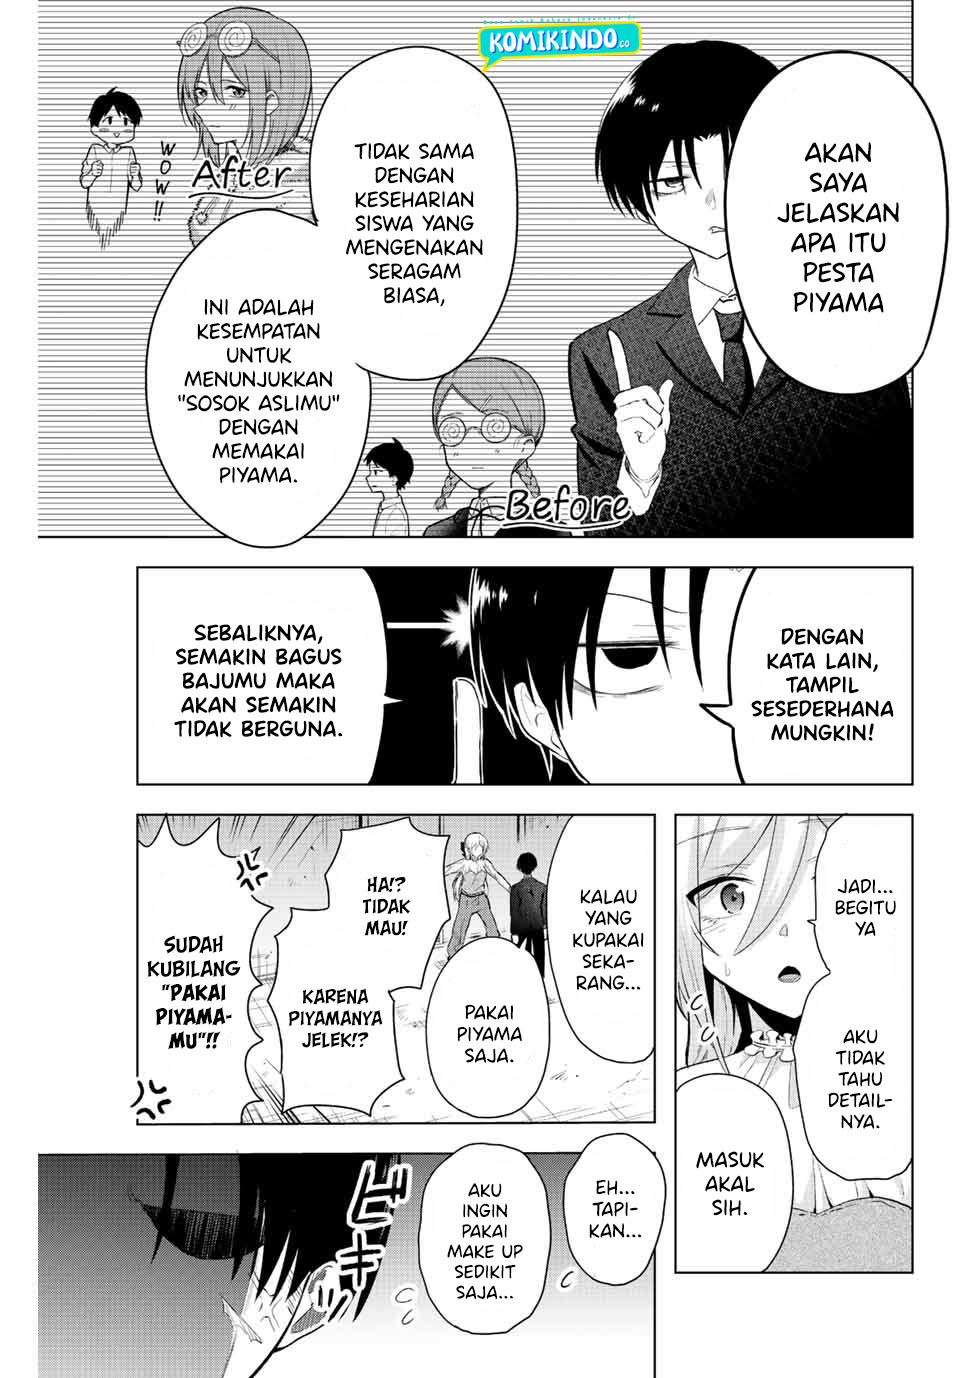 The Death Game Is All That Saotome-san Has Left Chapter 06